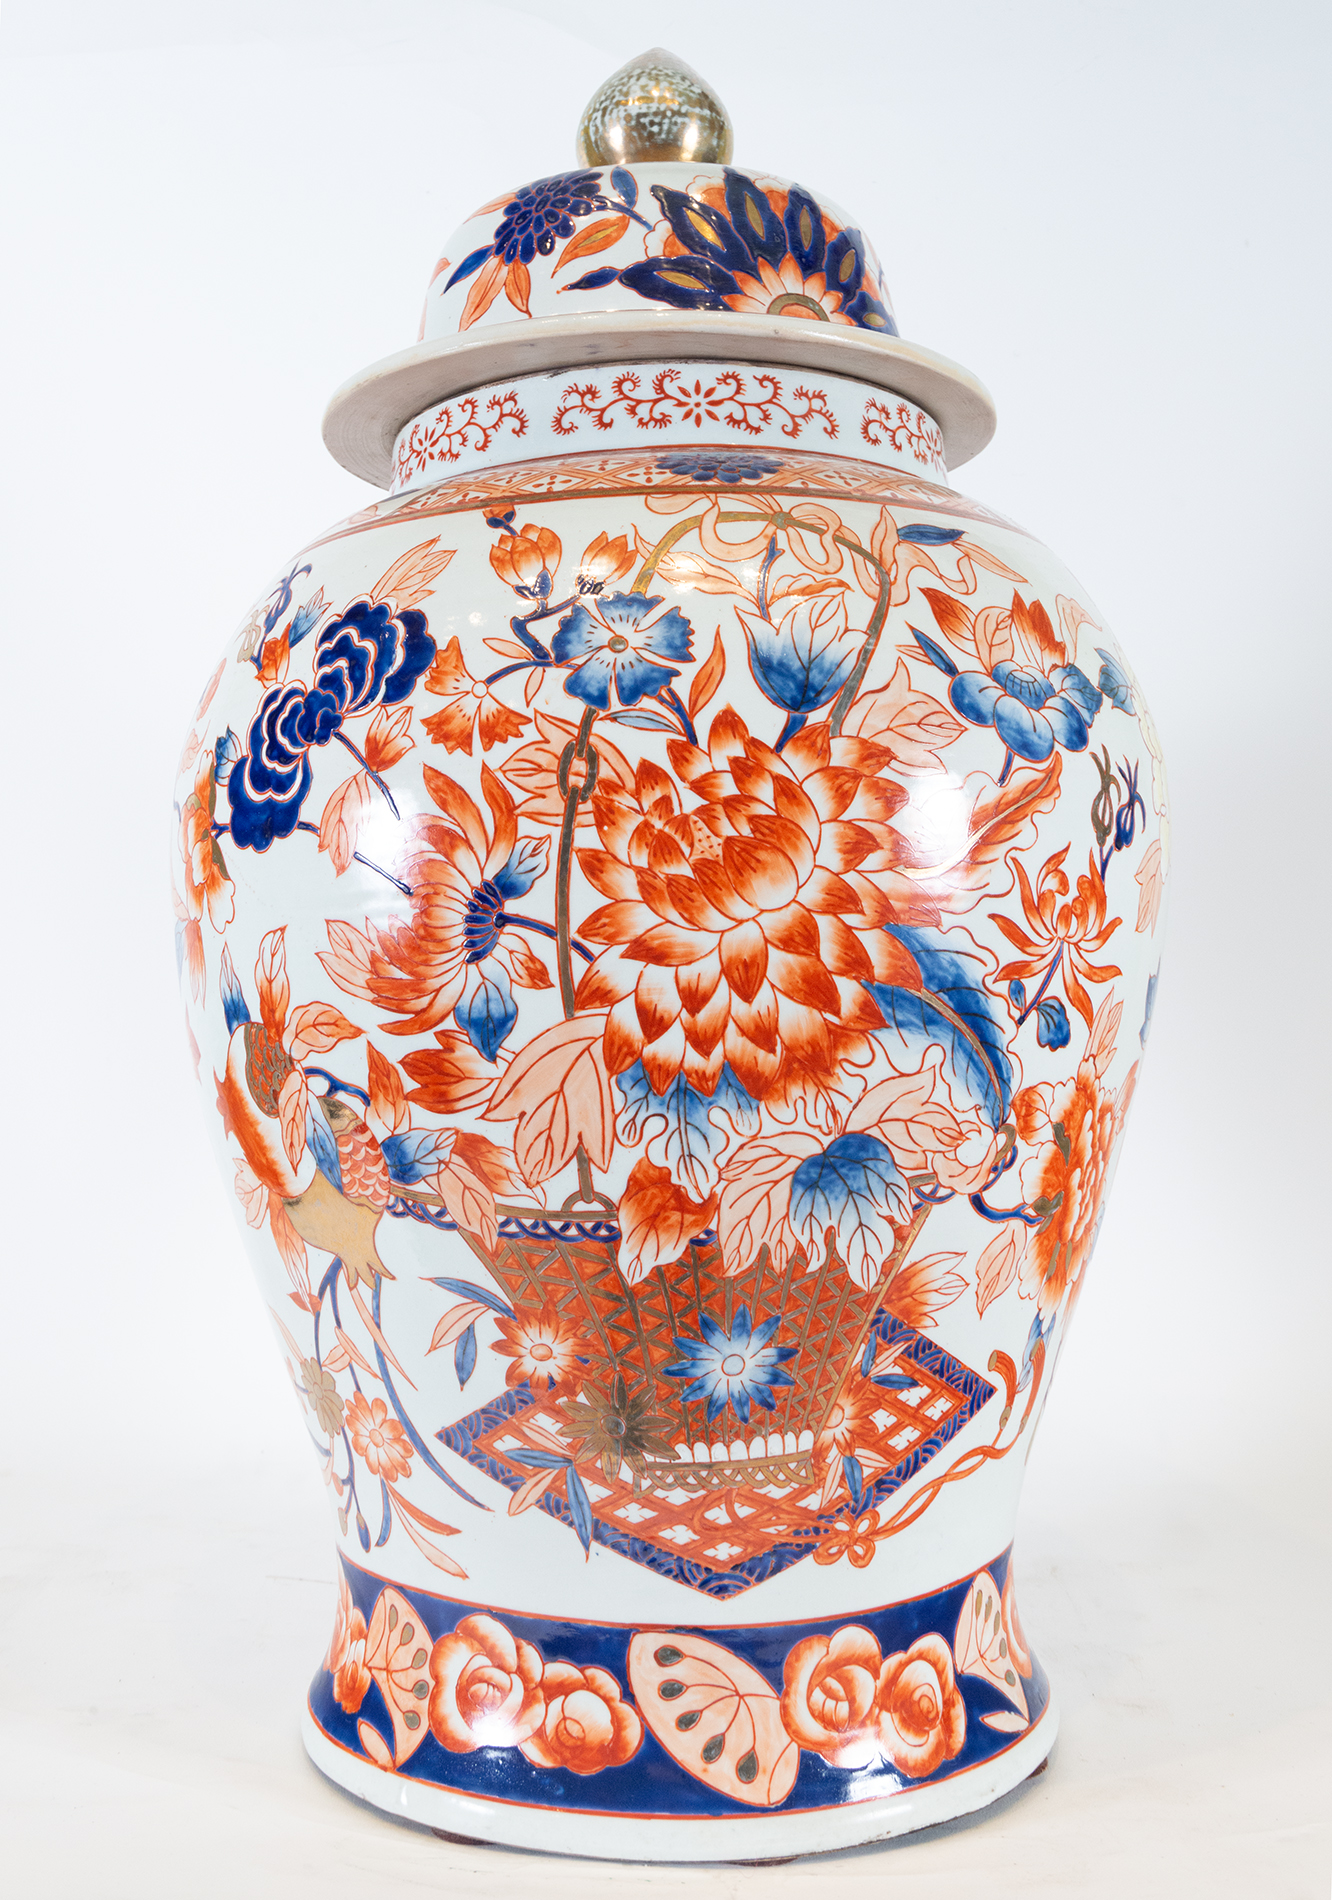 Elegant pair of Imari porcelain bowls, Chinese work from the 19th - 20th century - Image 3 of 5